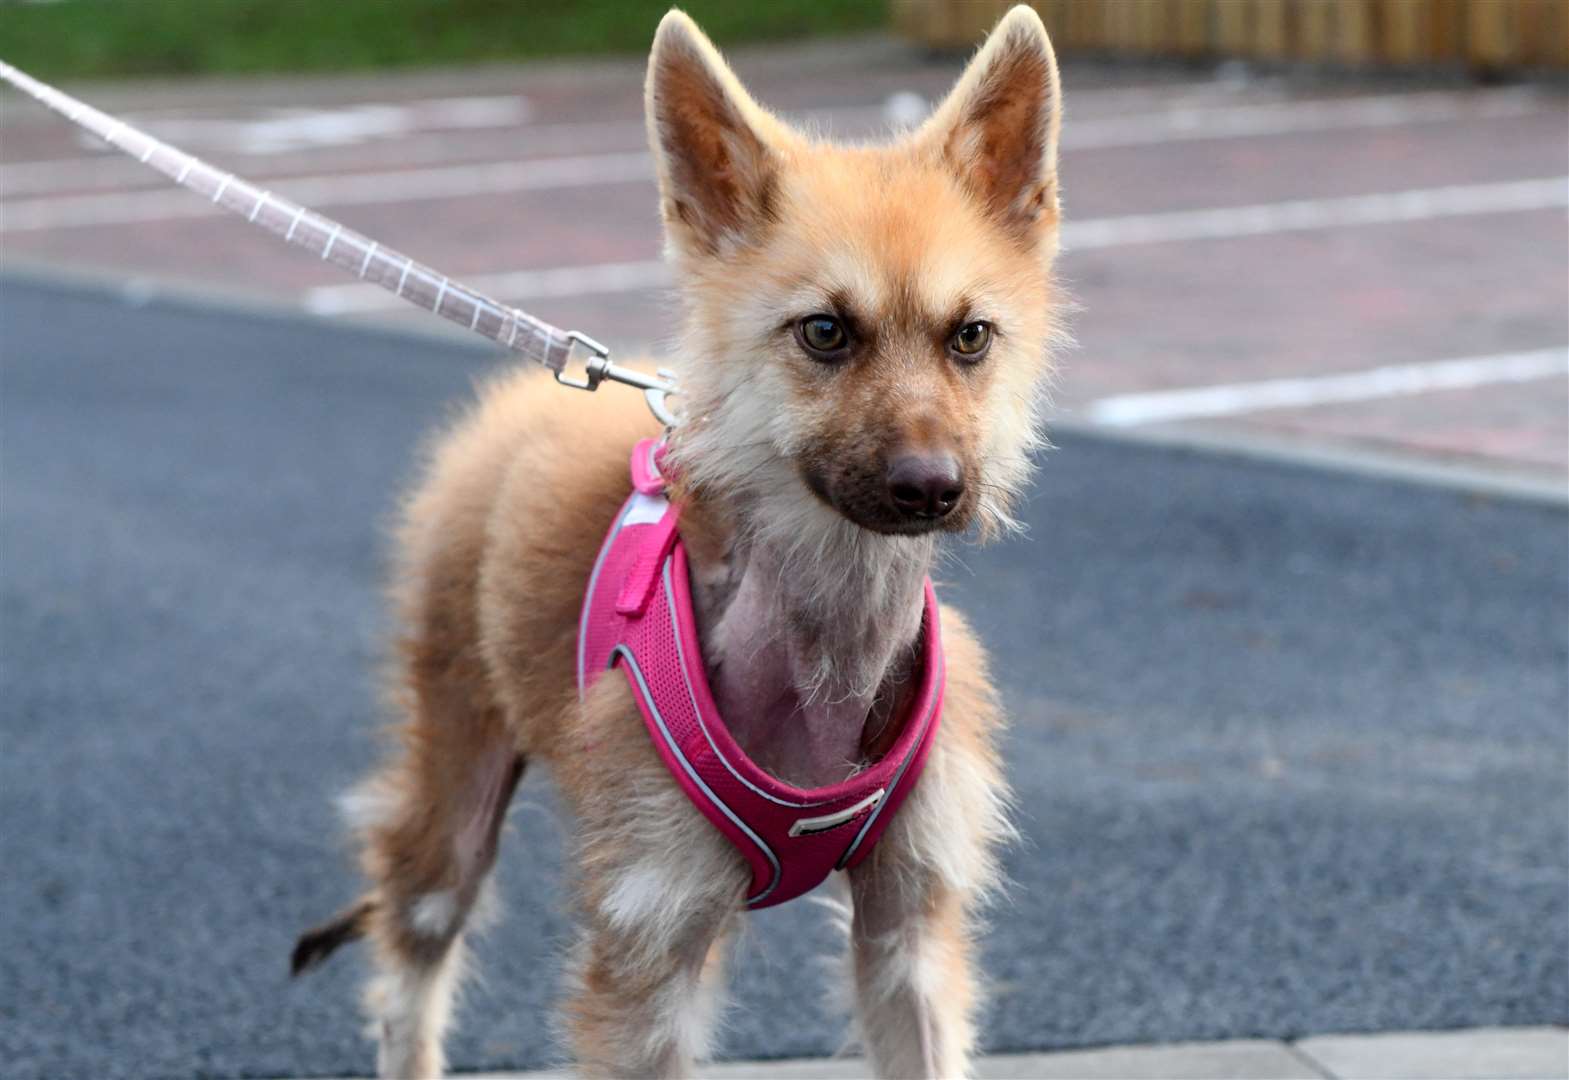 Foxy-looking dwarf German shepherd Bella melts hearts as she finds forever  home after stay at Munlochy Animal Aid shelter on Black Isle